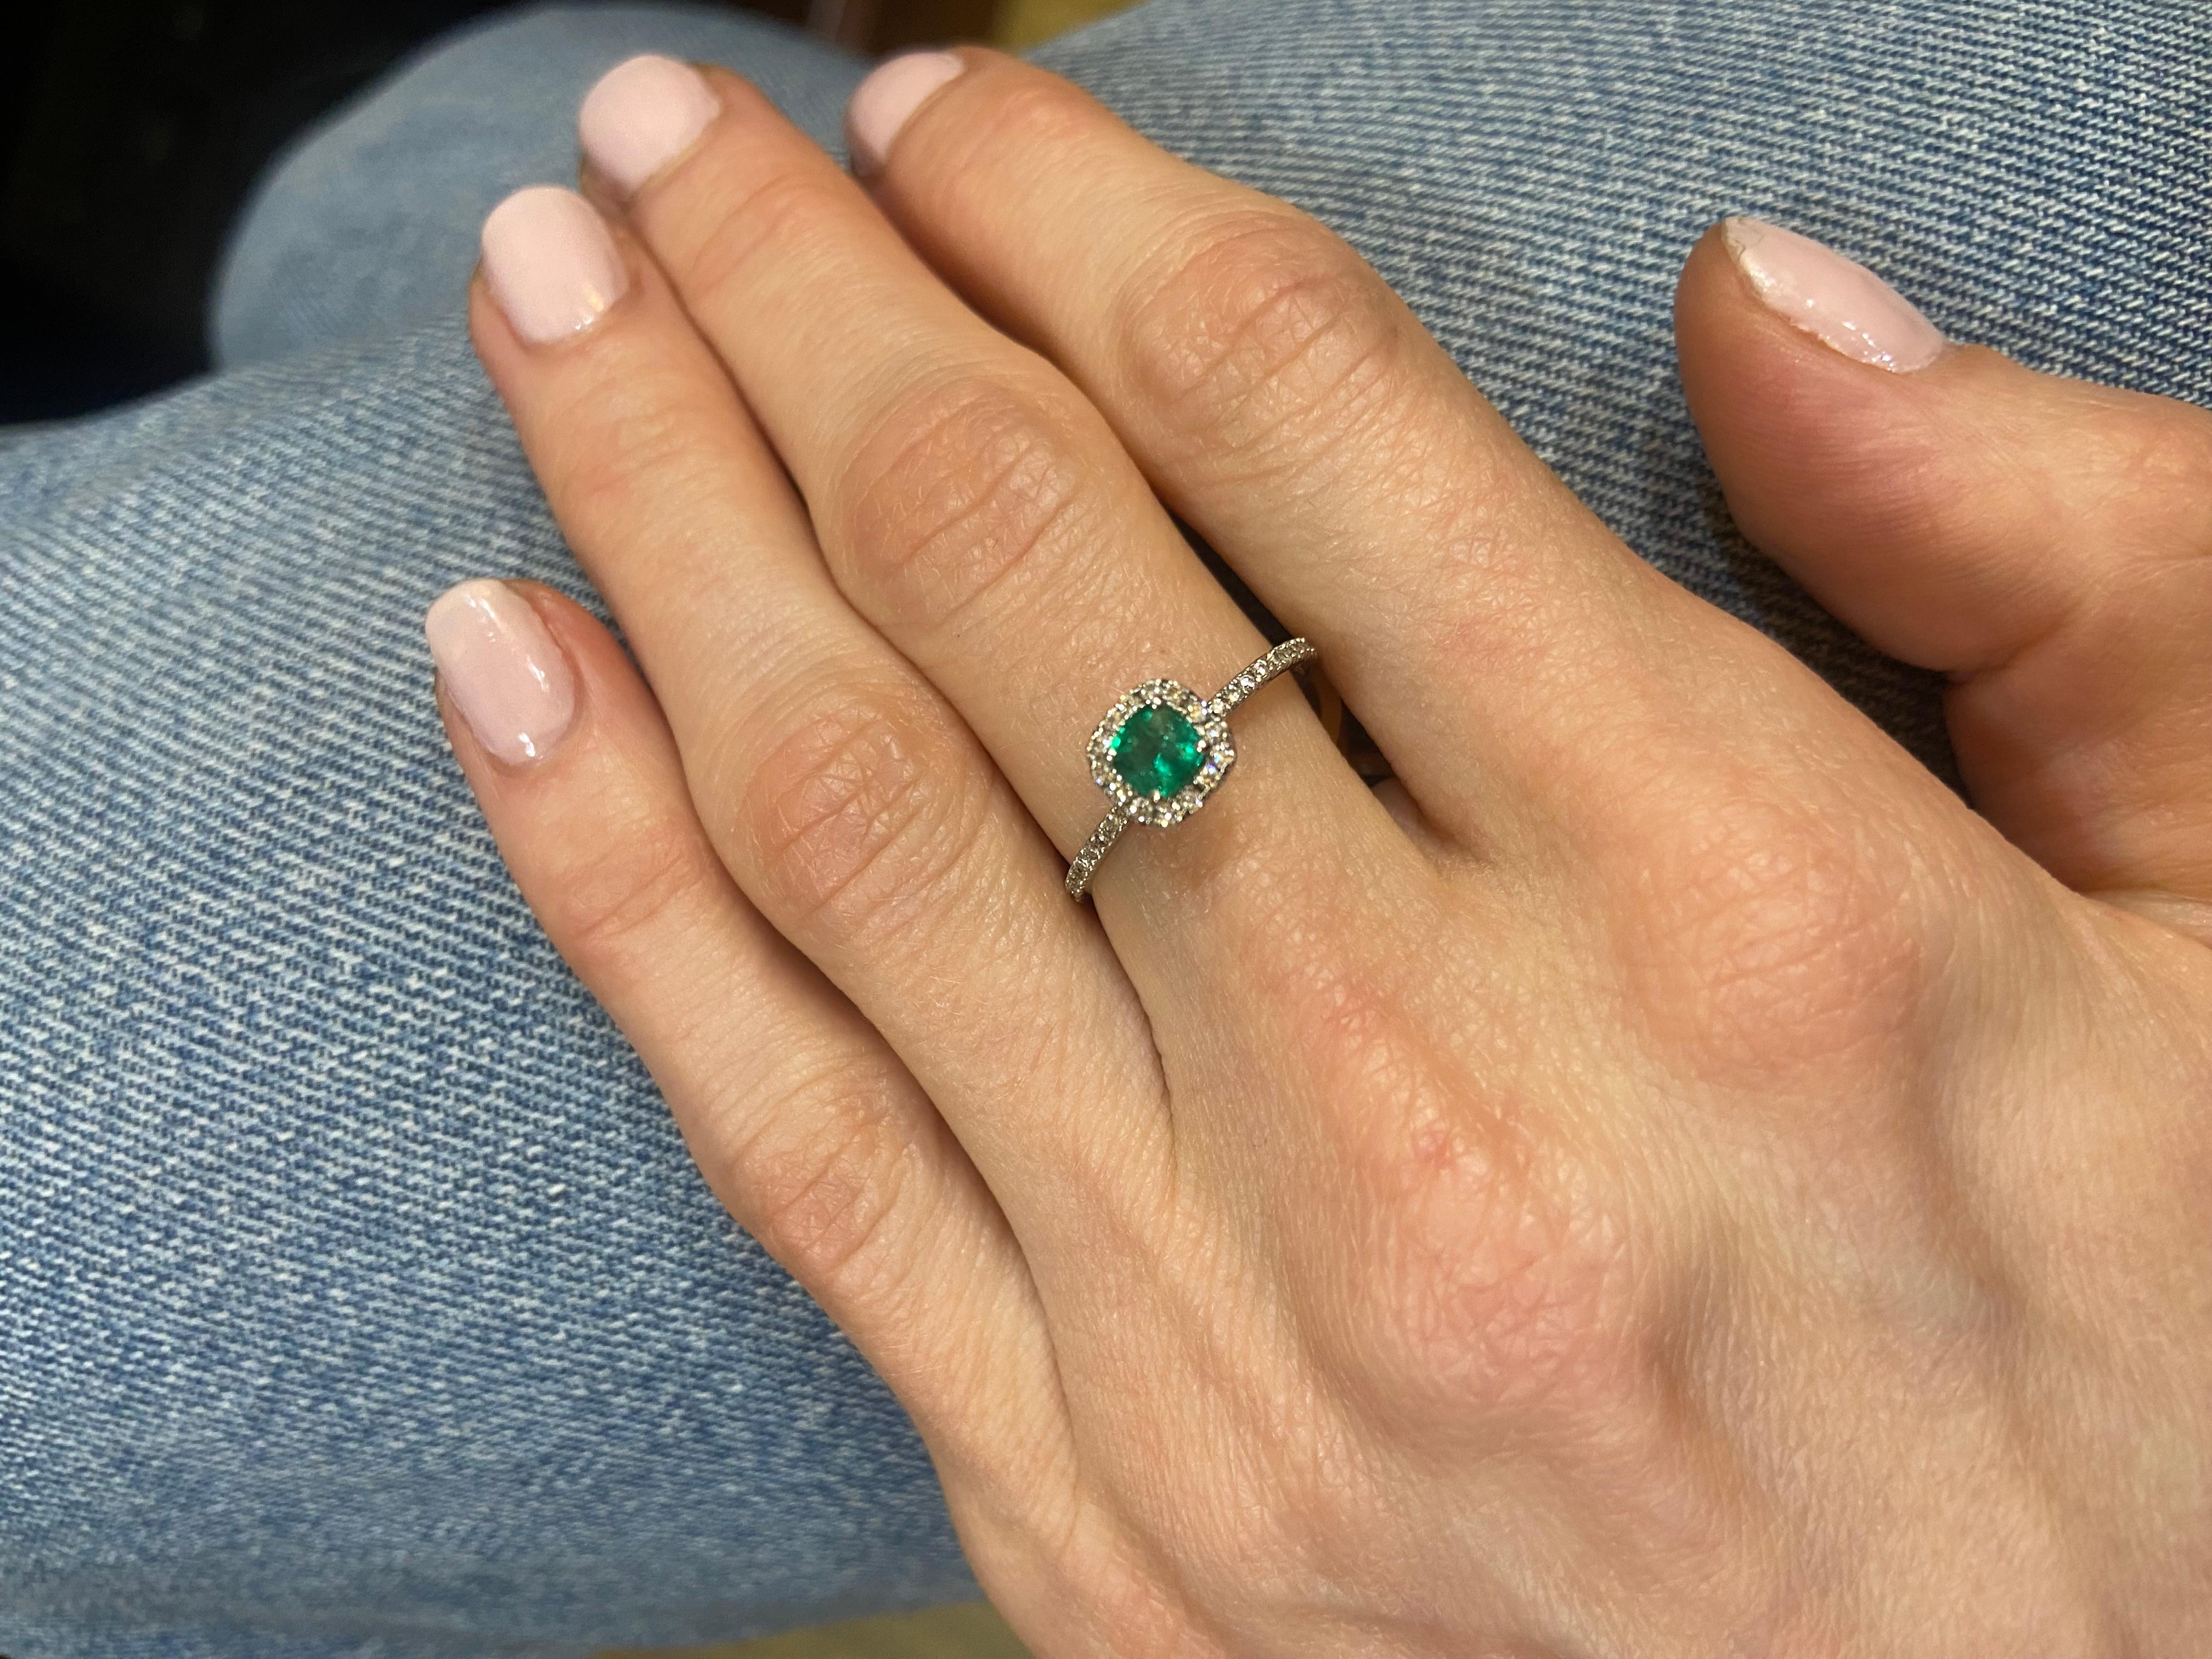 0.59ctw Cushion Cut Emerald & Round Diamond Petite Ring in 14KT White Gold In New Condition For Sale In New York, NY